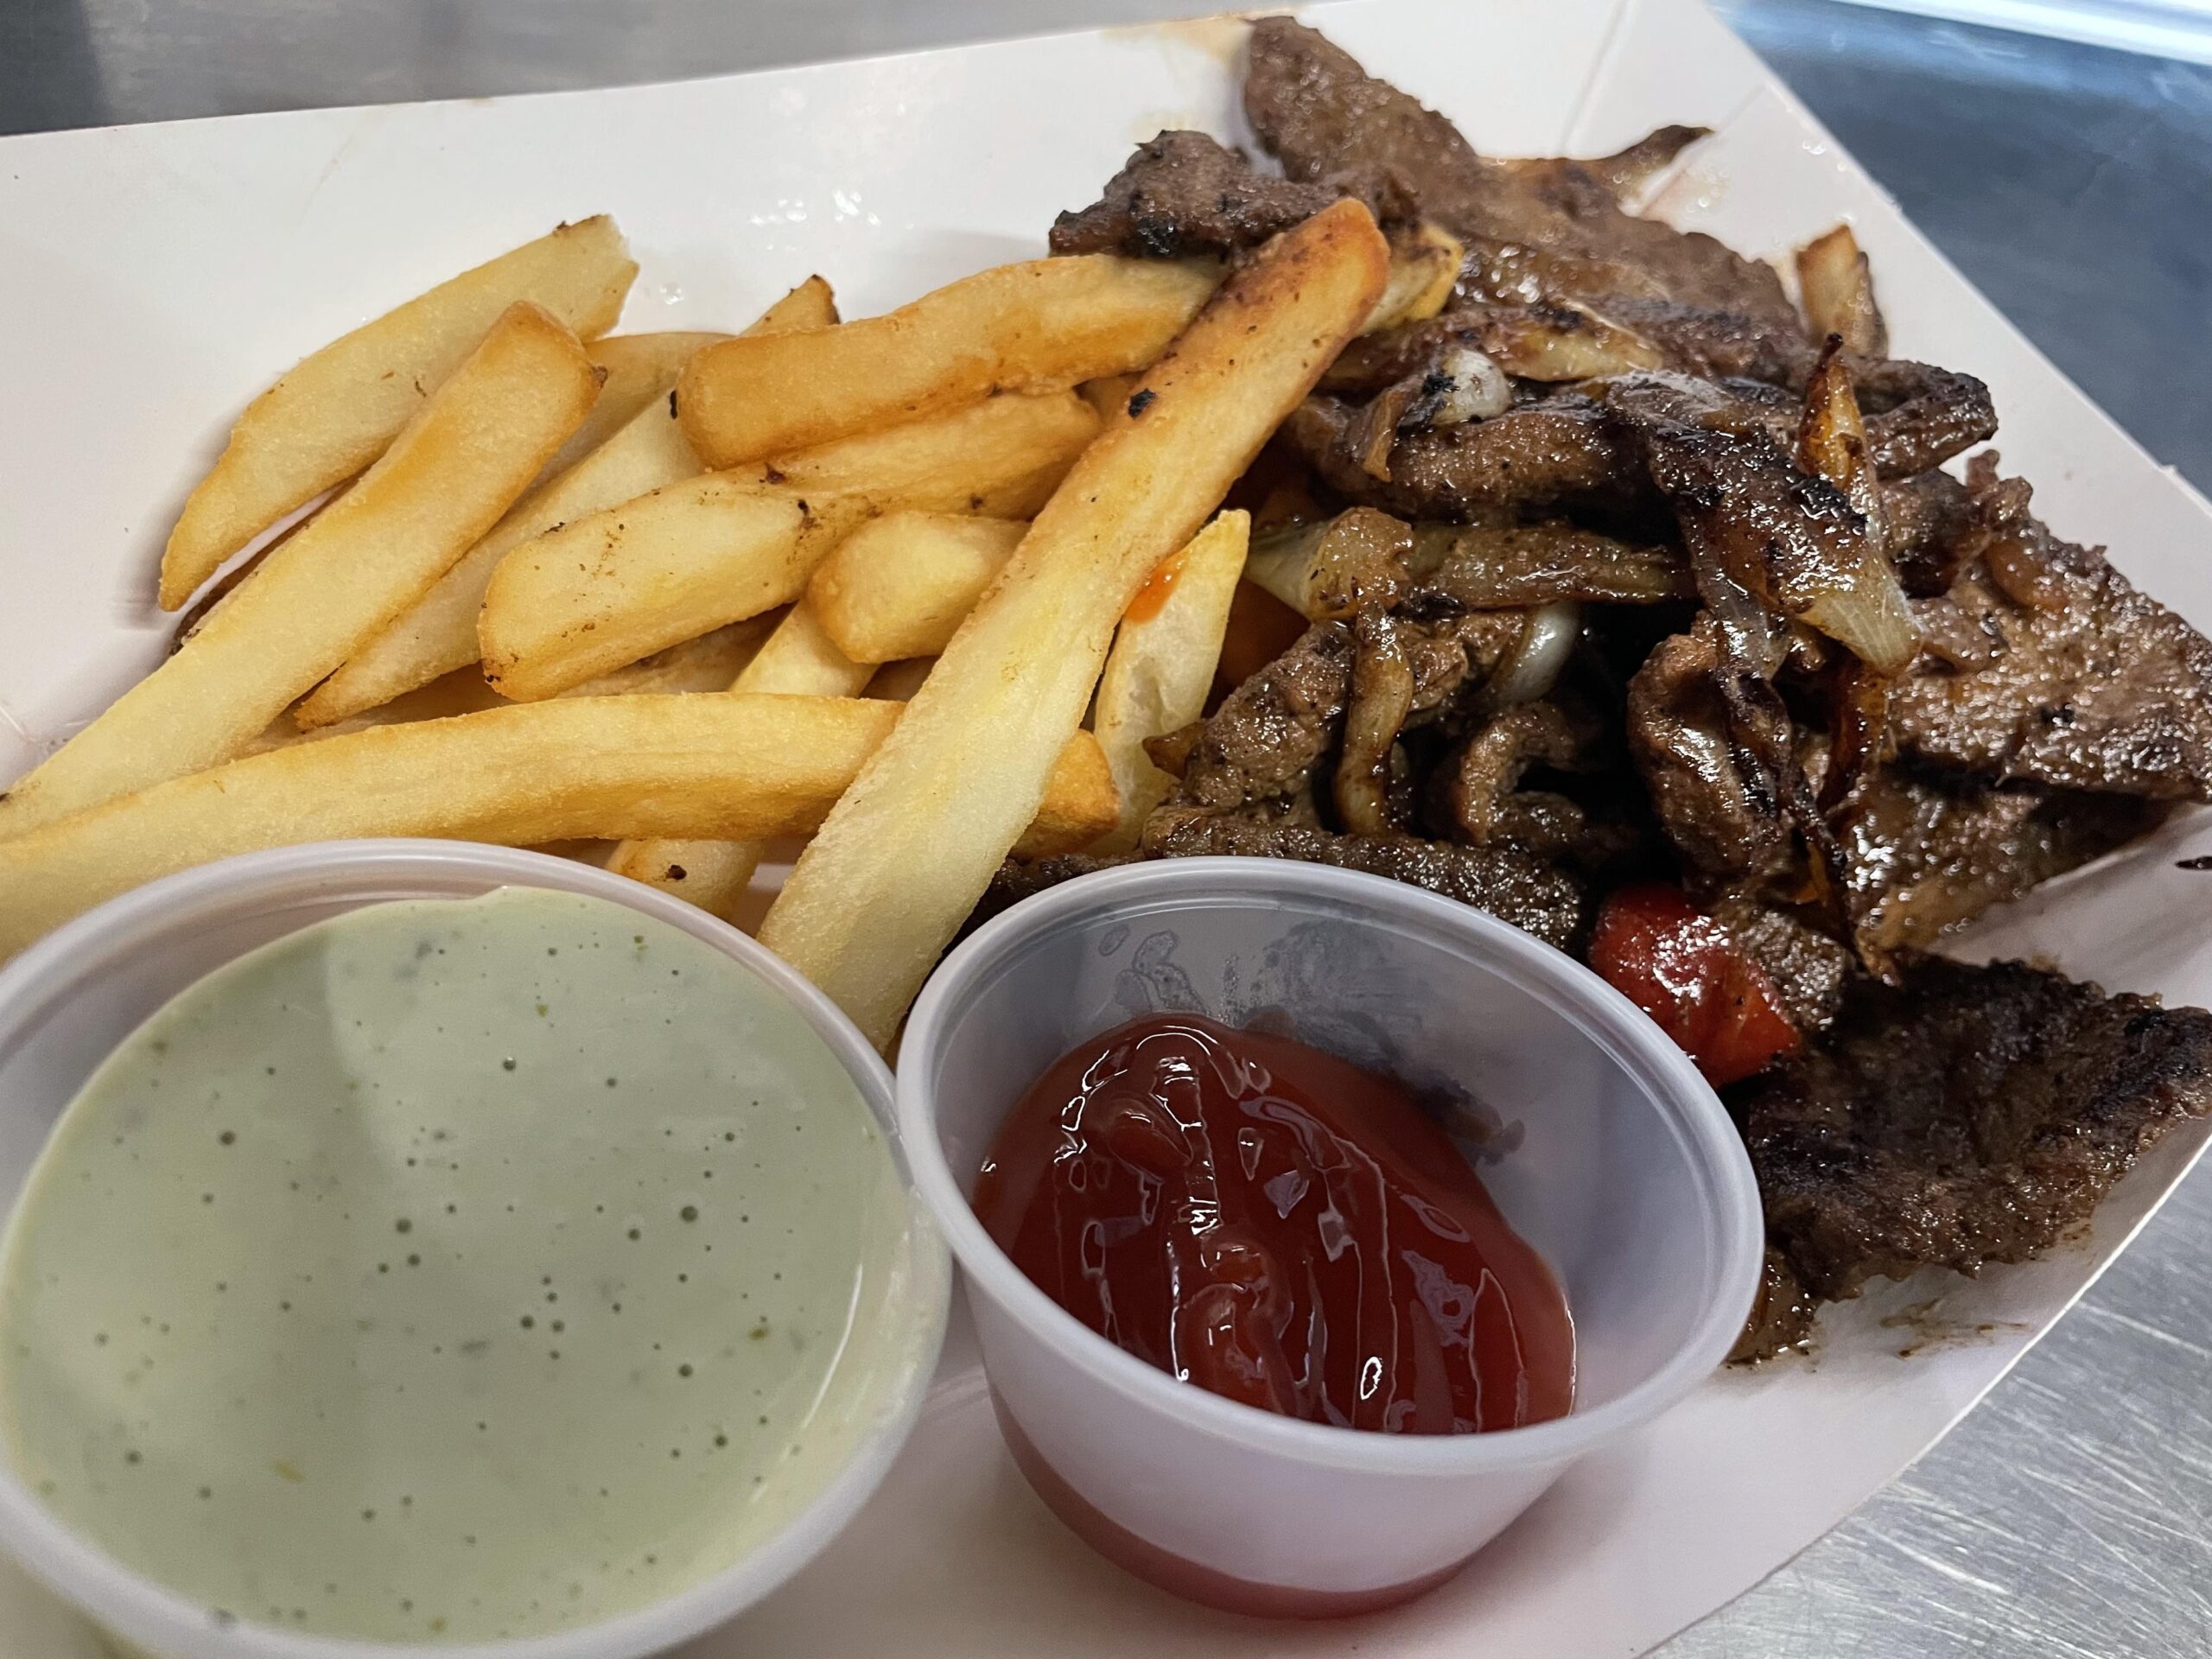 Grilled steak and french fries from Venezuelan food truck Caripito's